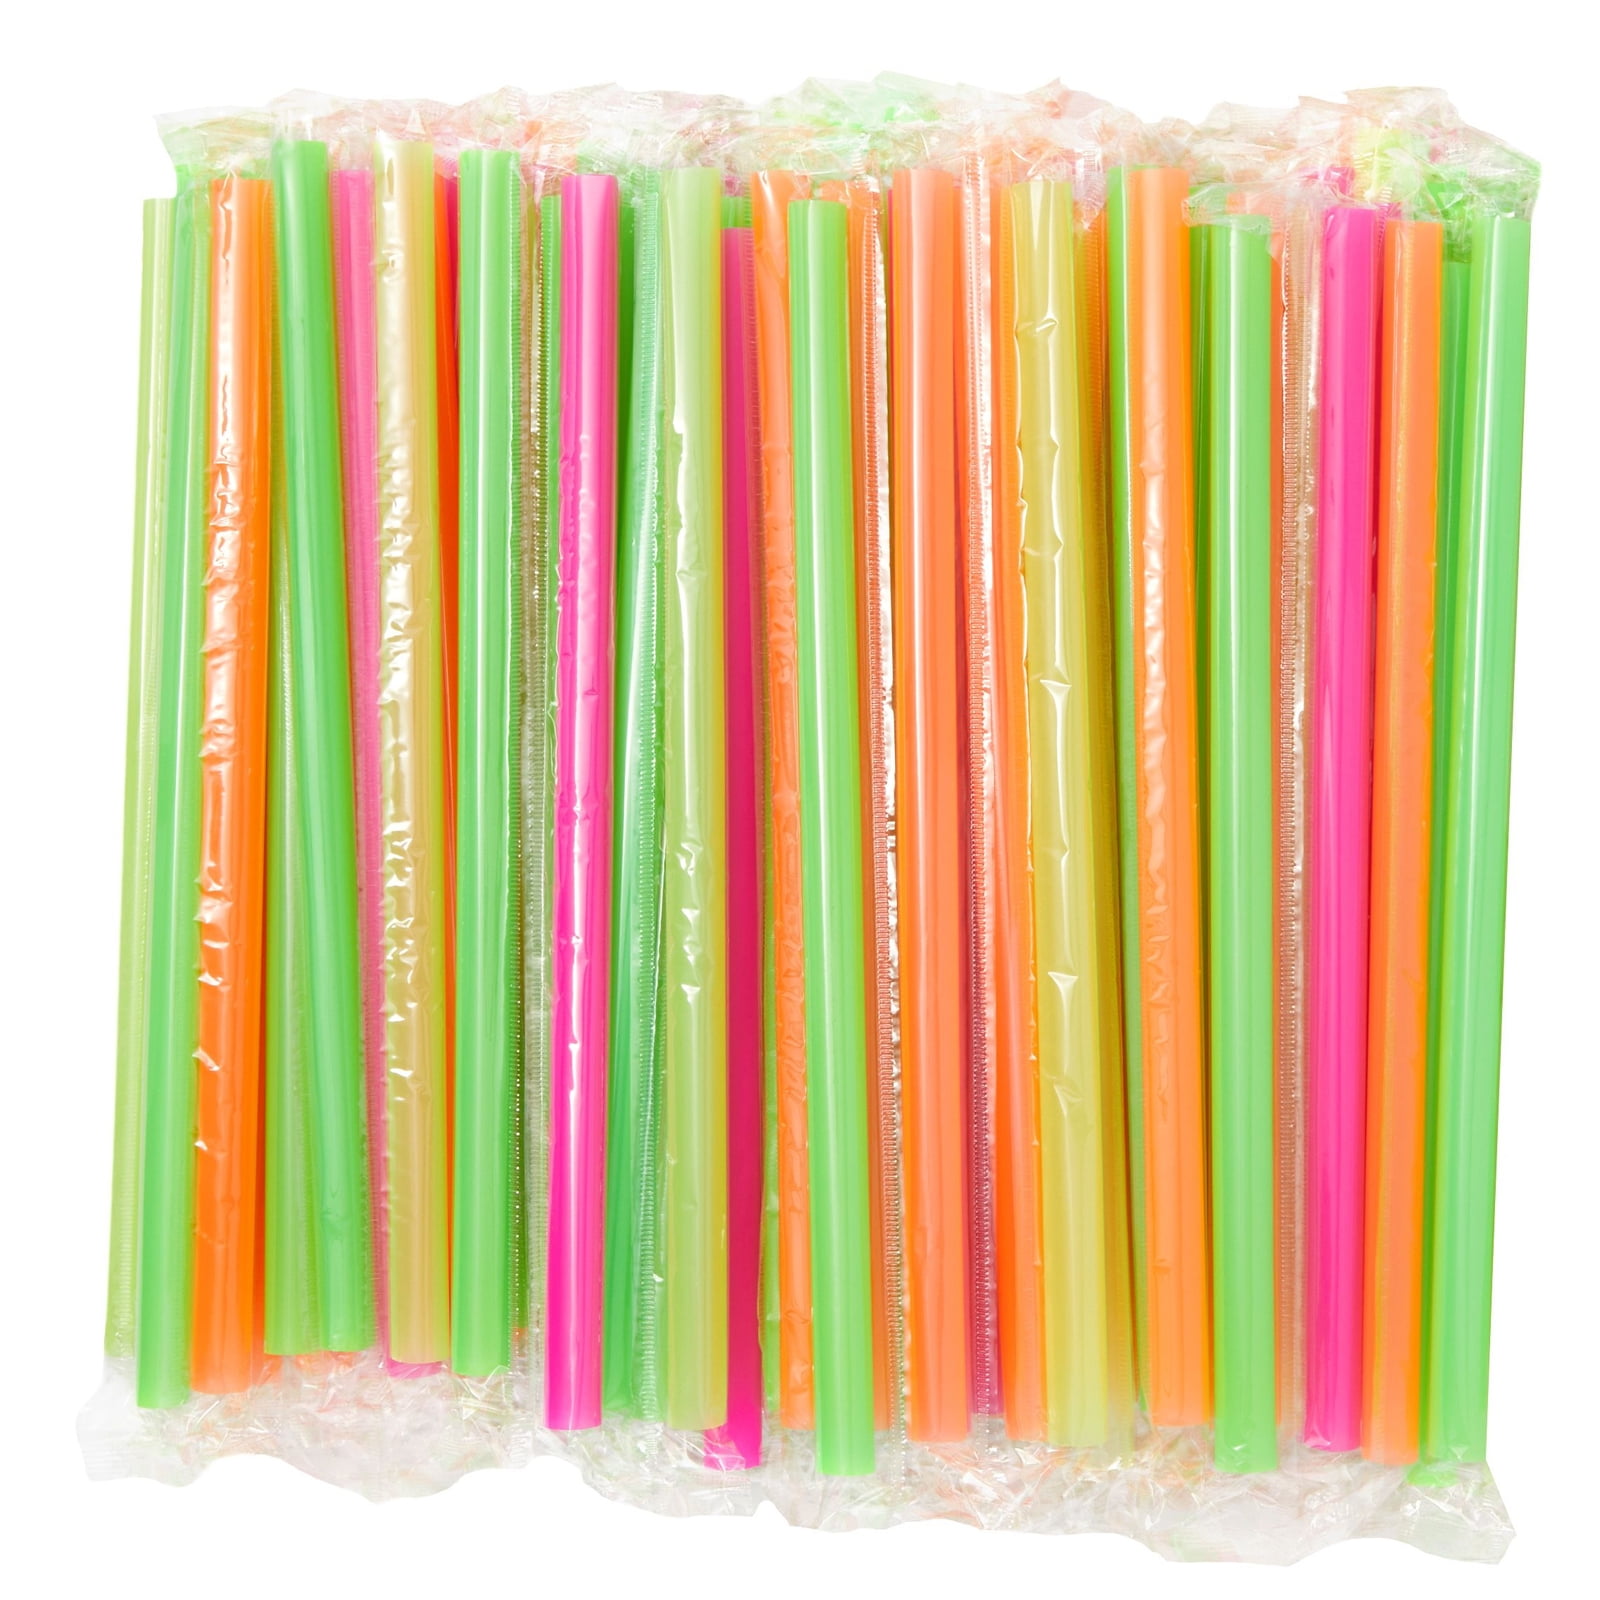 100 pcs Neon Plastic Drinking Spoon Straws Party Smoothie Jumbo Hole Multi-Color 